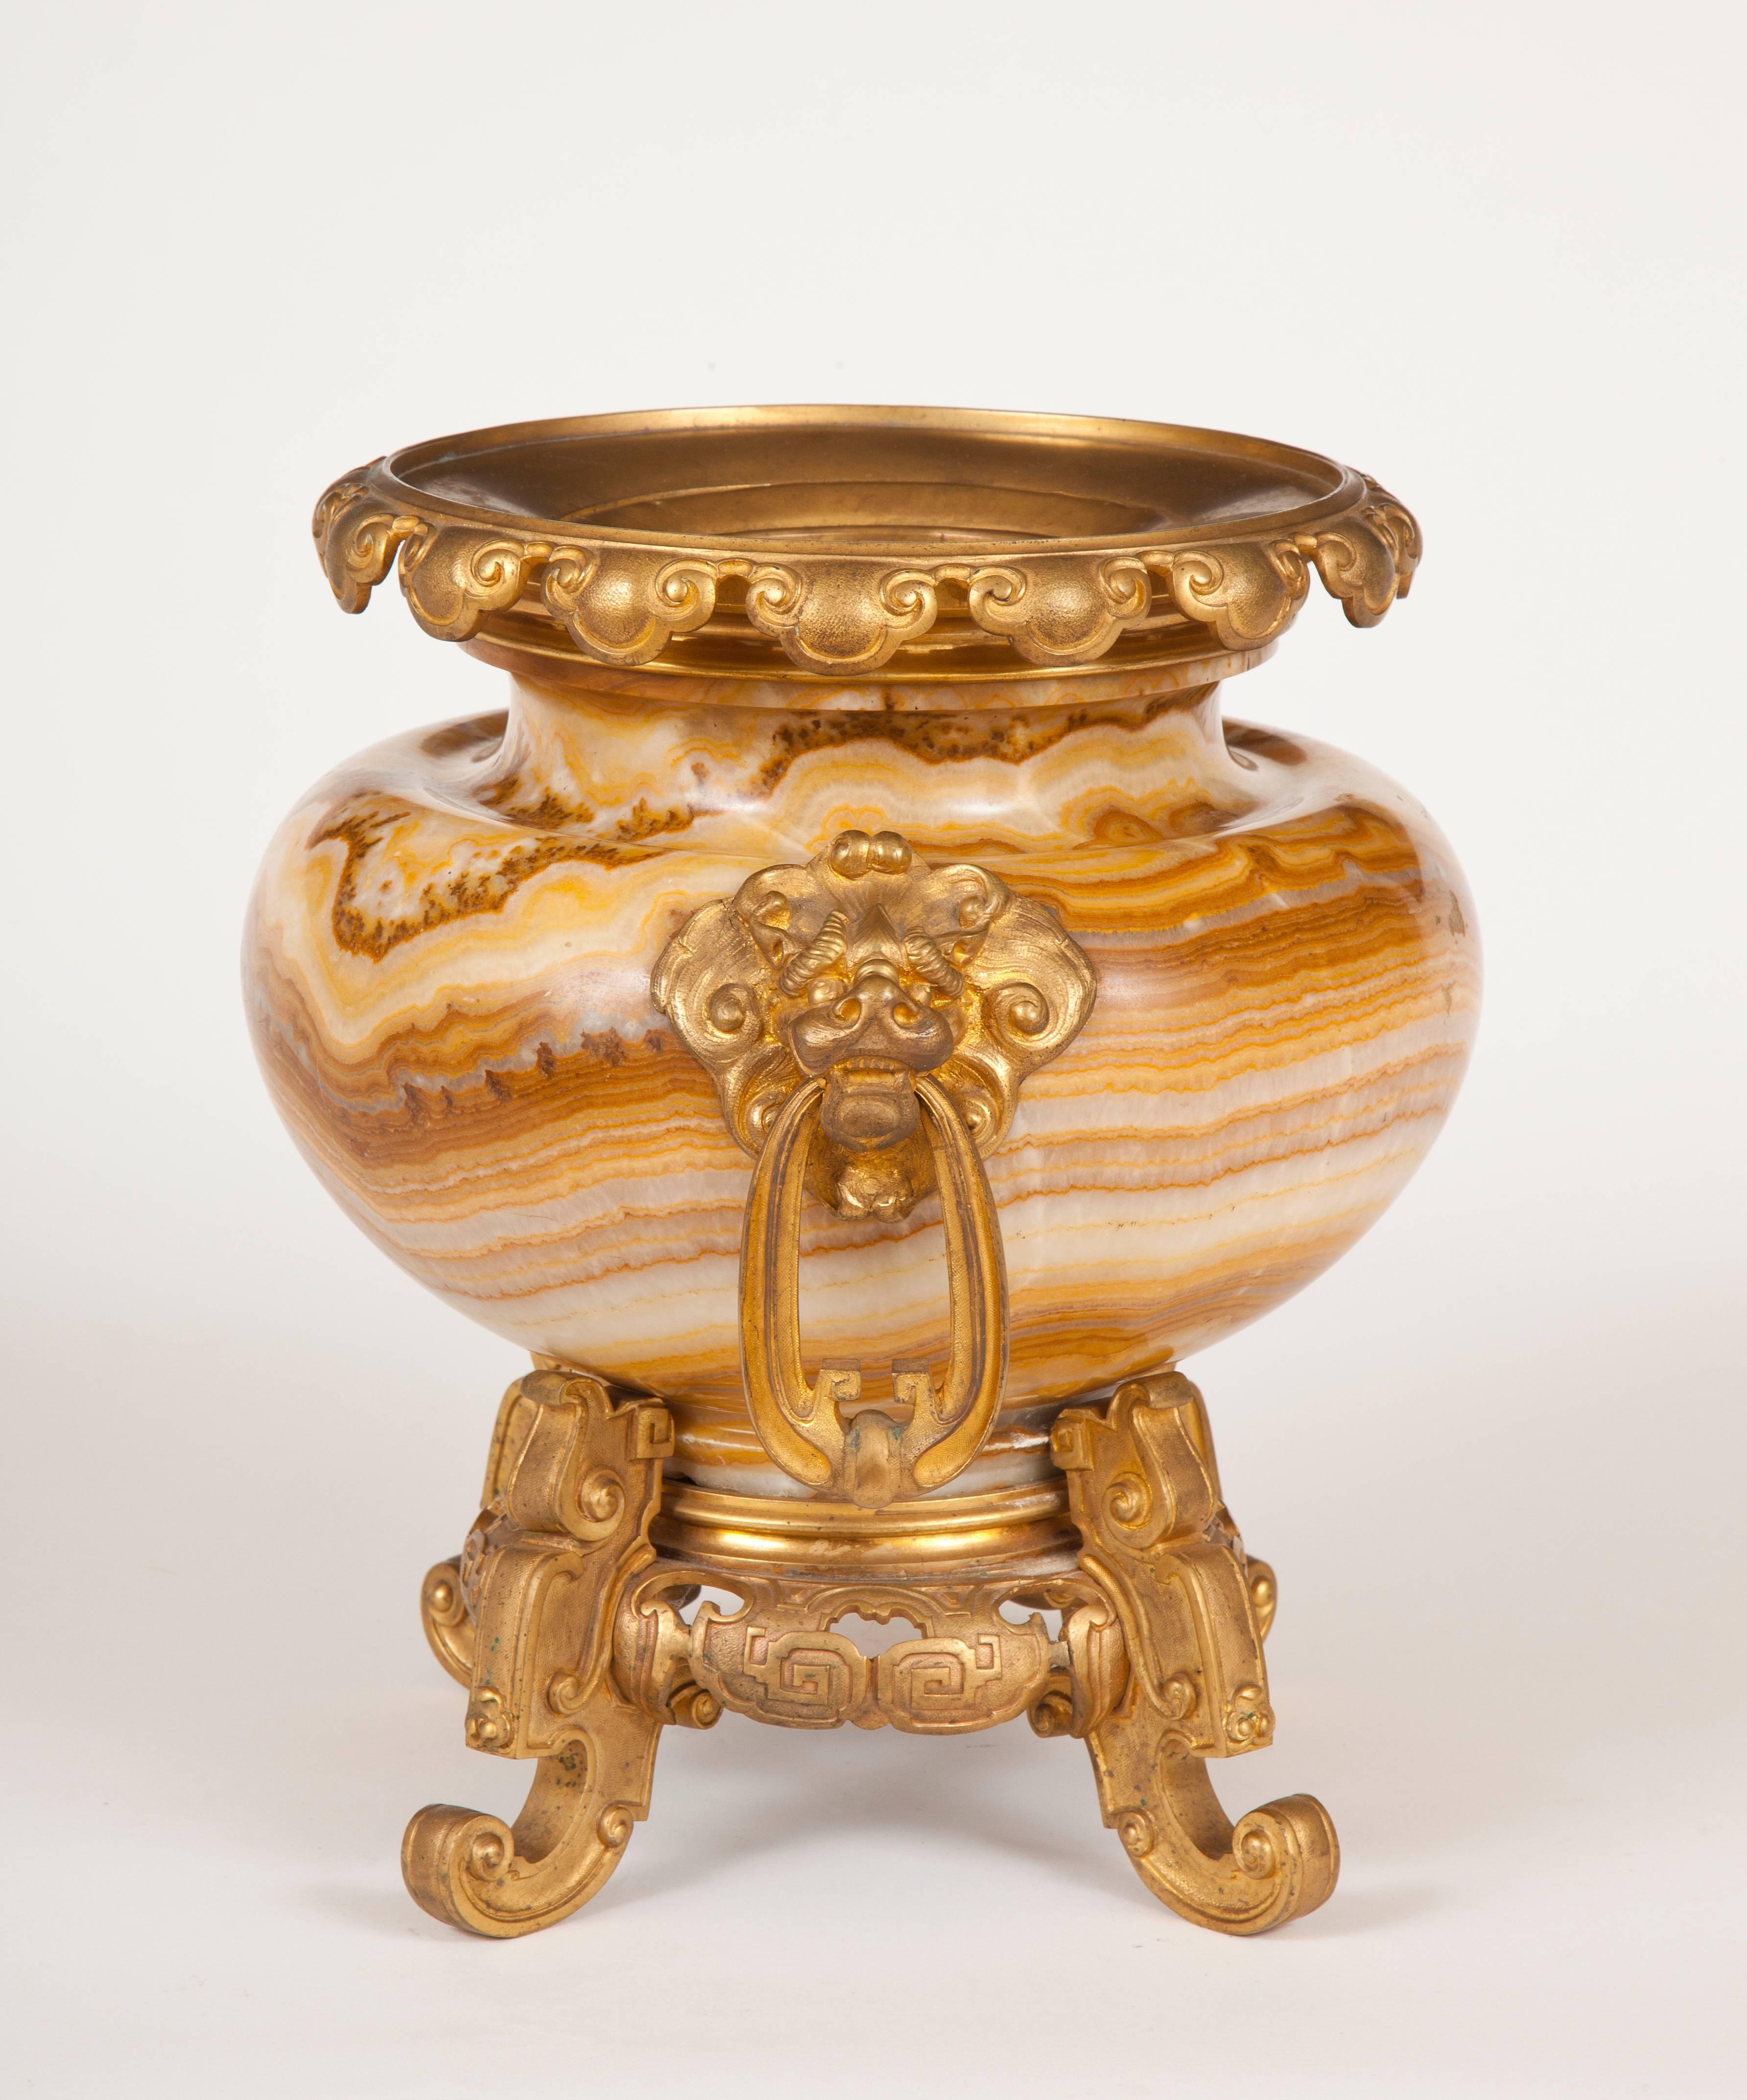 An excellent example of the Napoleon III for Asian exoticism, this fine French urn is made of banded alabaster with gilded bronze mounts all in the taste for Japonisme.